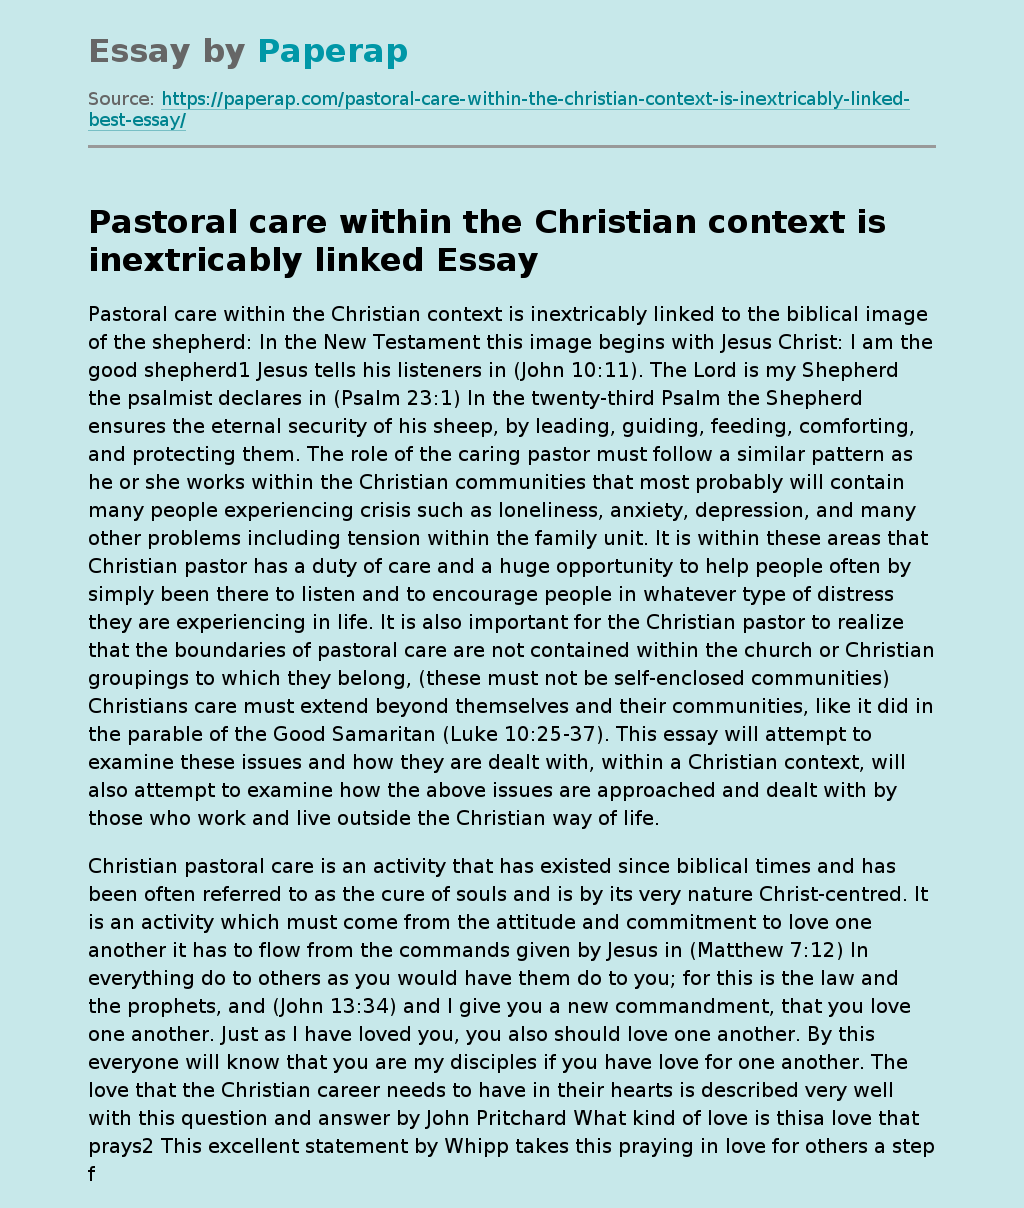 Pastoral care within the Christian context is inextricably linked